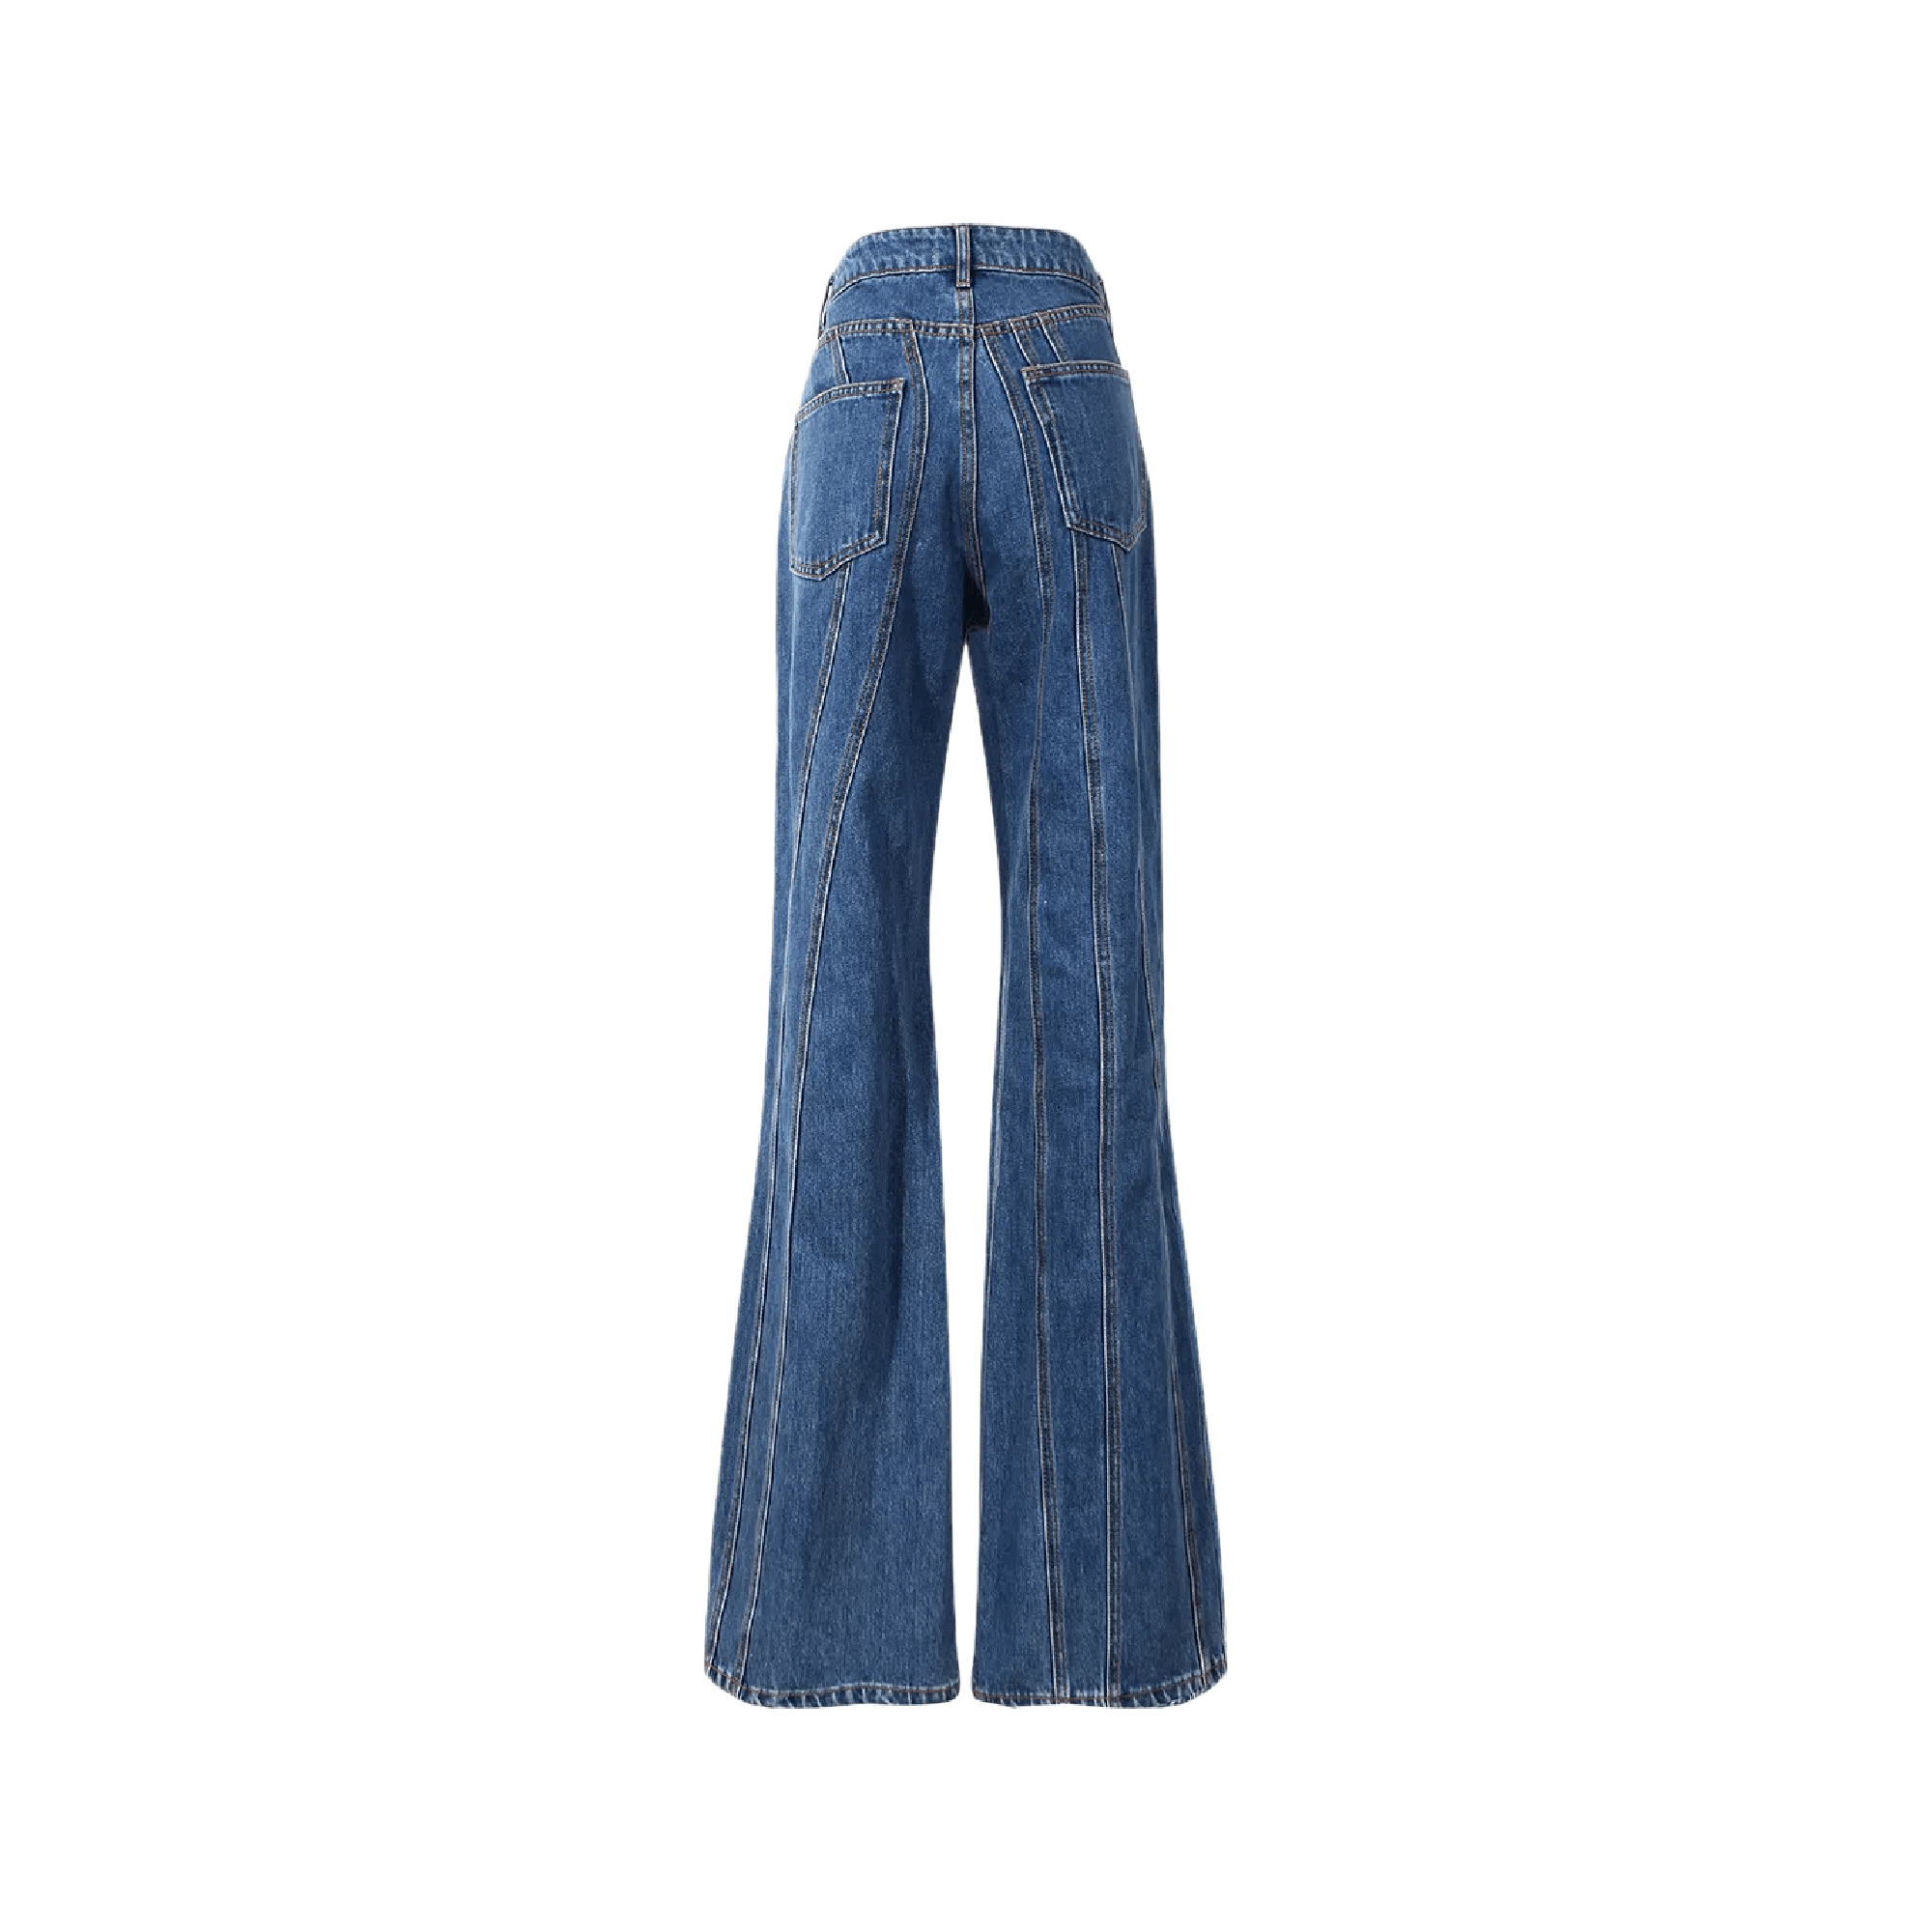 Akari long flared jeans - itsy, it‘z different